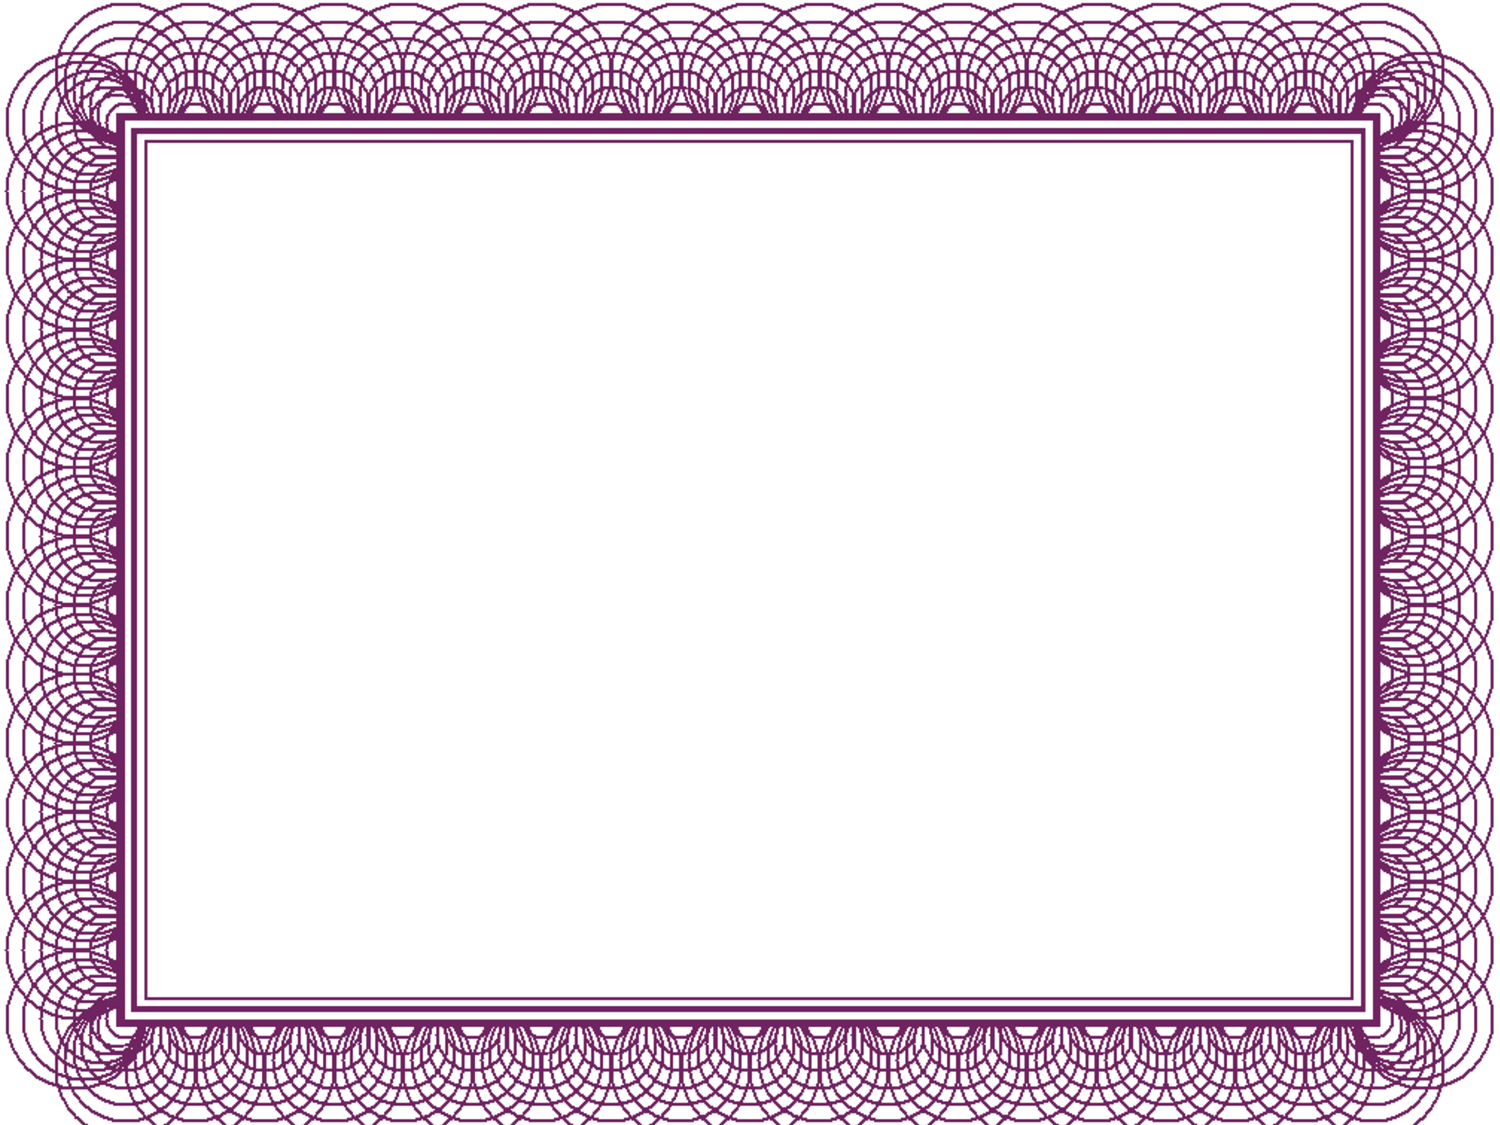 7-best-images-of-free-printable-purple-borders-and-frames-free